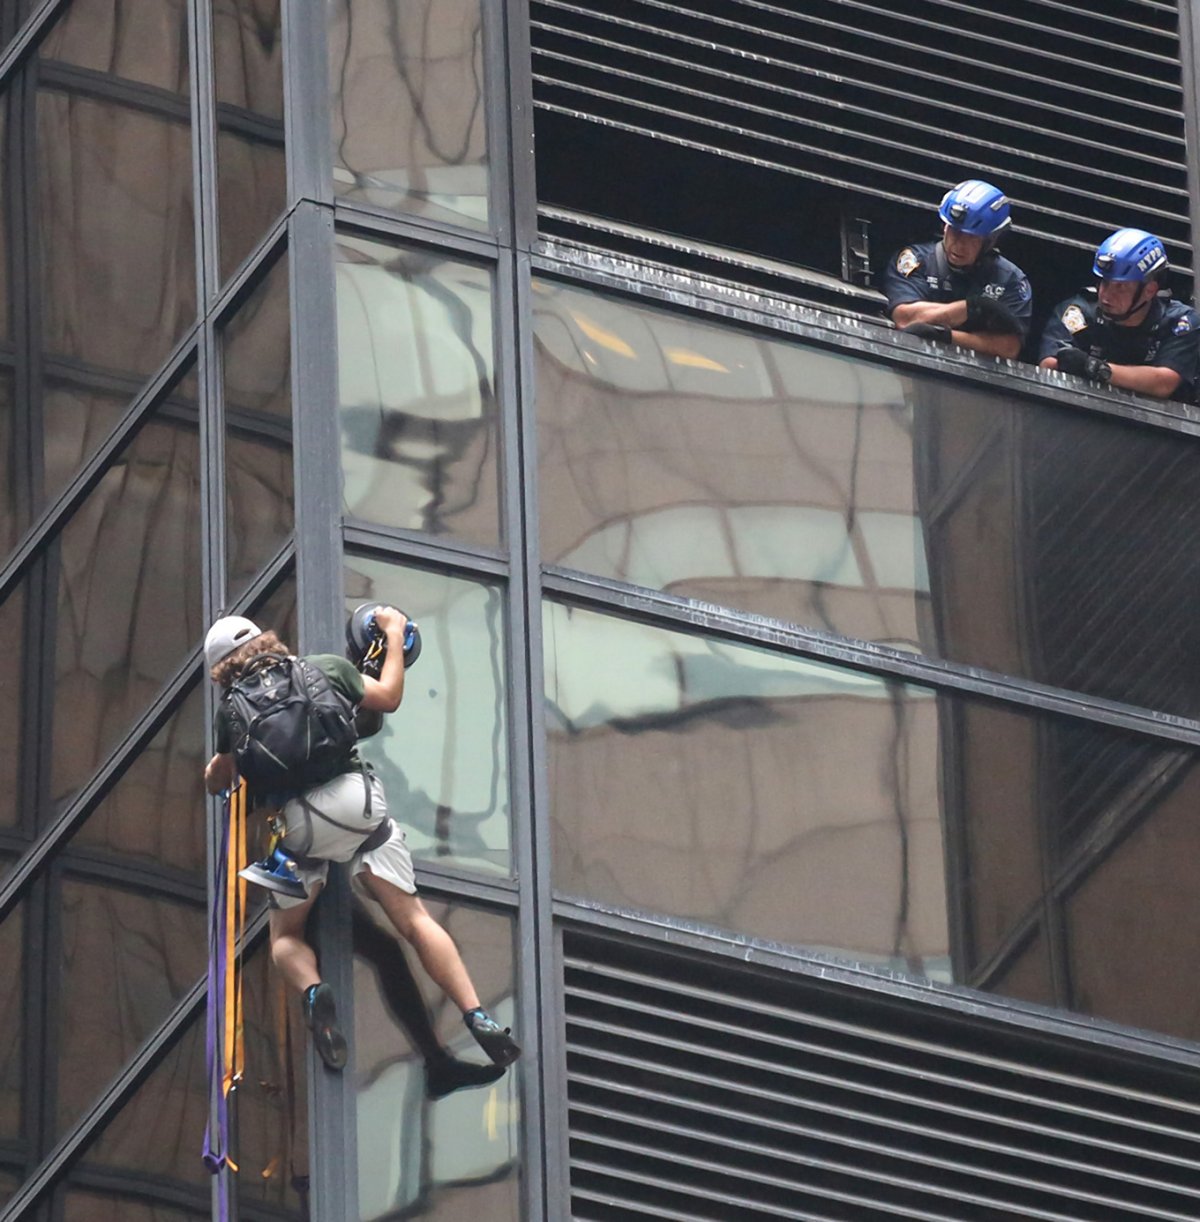 Stephen Rogata, around the eighth floor of Trump Tower, moving from an east-facing wall to a south-facing one after police cut through ventilation grates above him. Photographer / writer Jefferson Siegel is a longtime contributor to The Villager. Photo by Jefferson Siegel